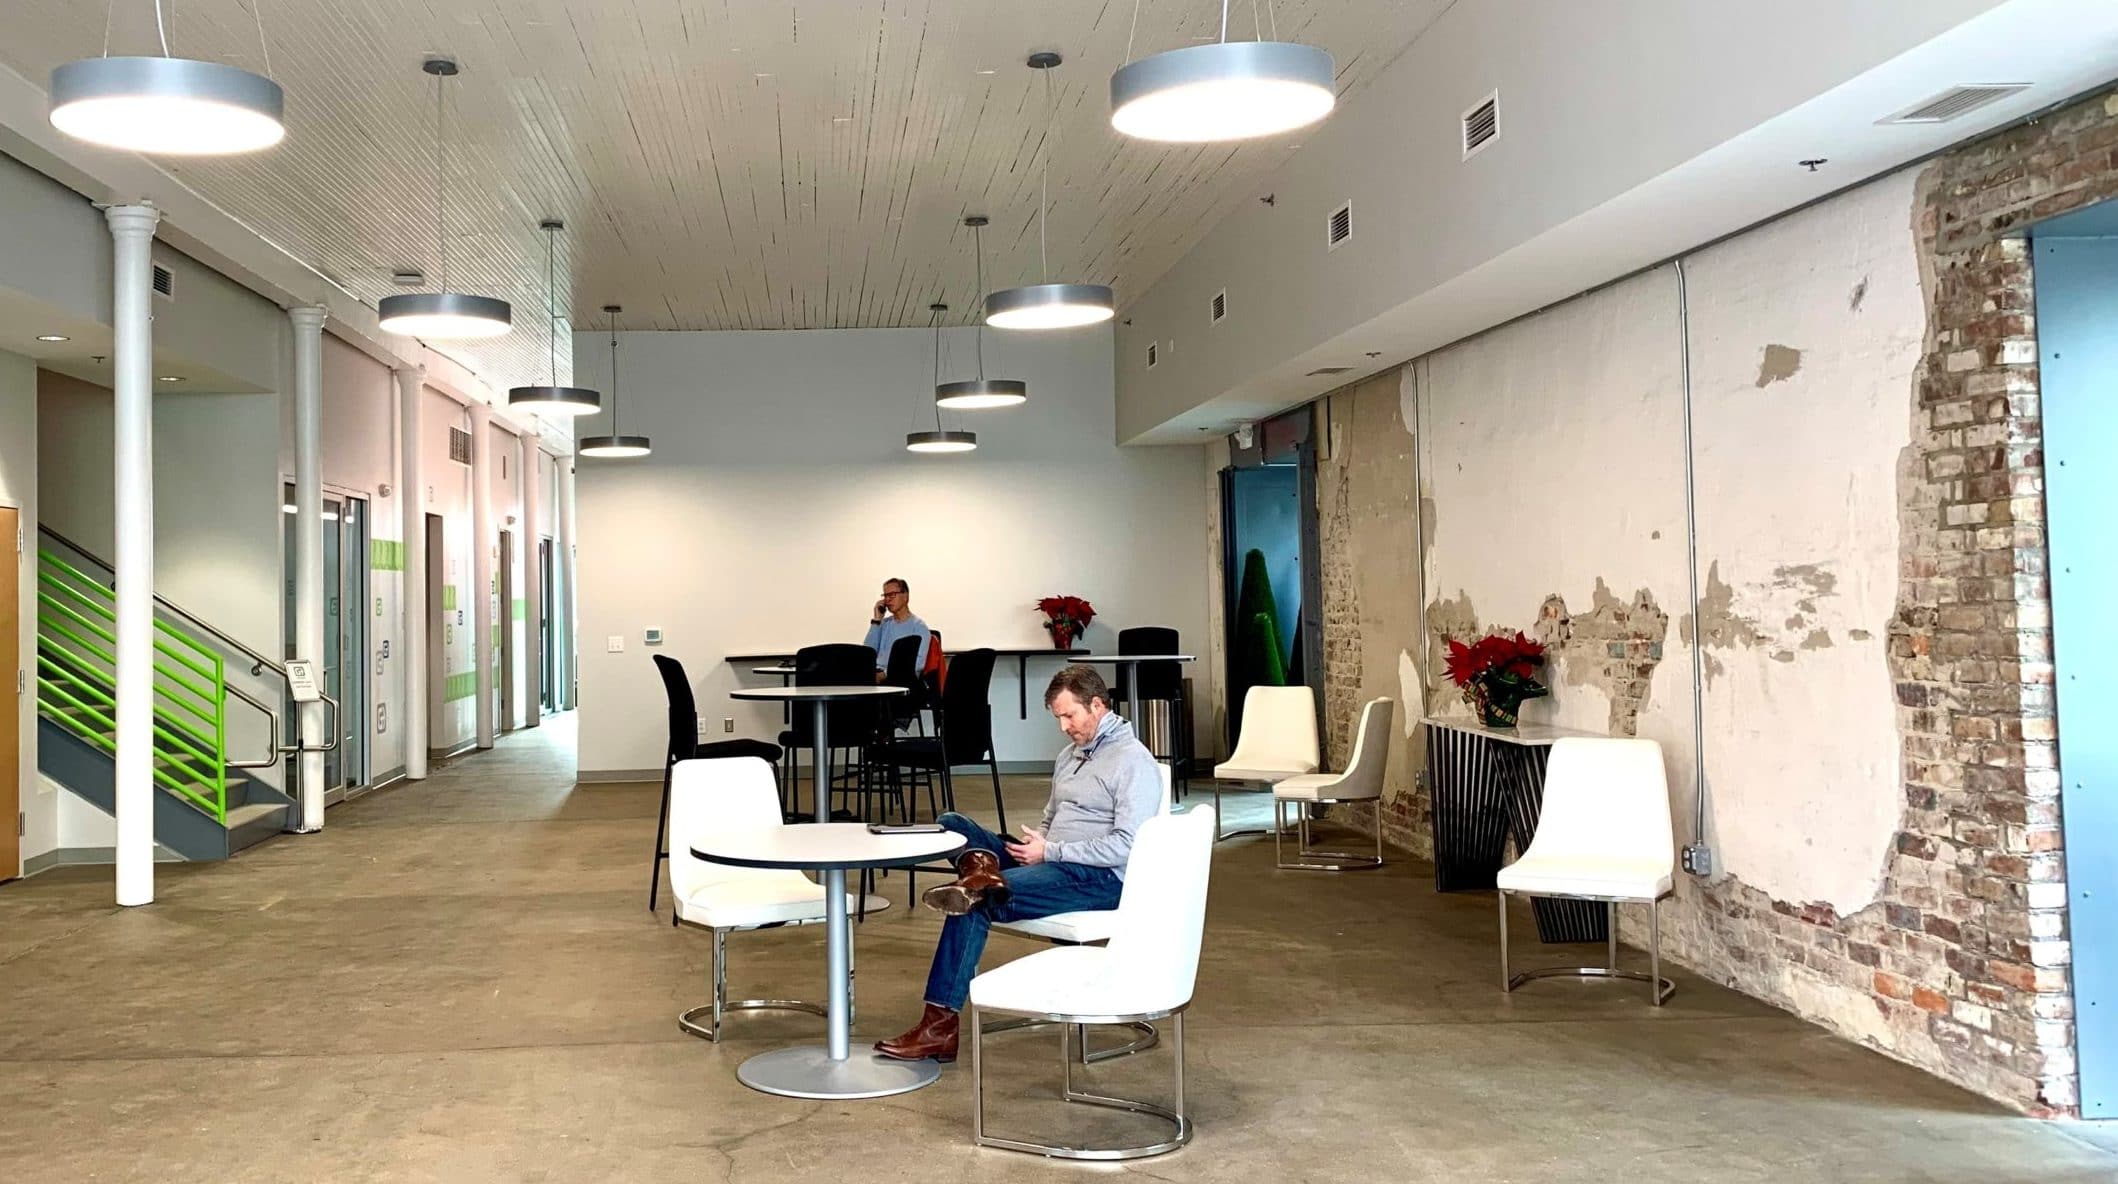 City of Wilson sparks innovation and entrepreneurship with dedicated workspace